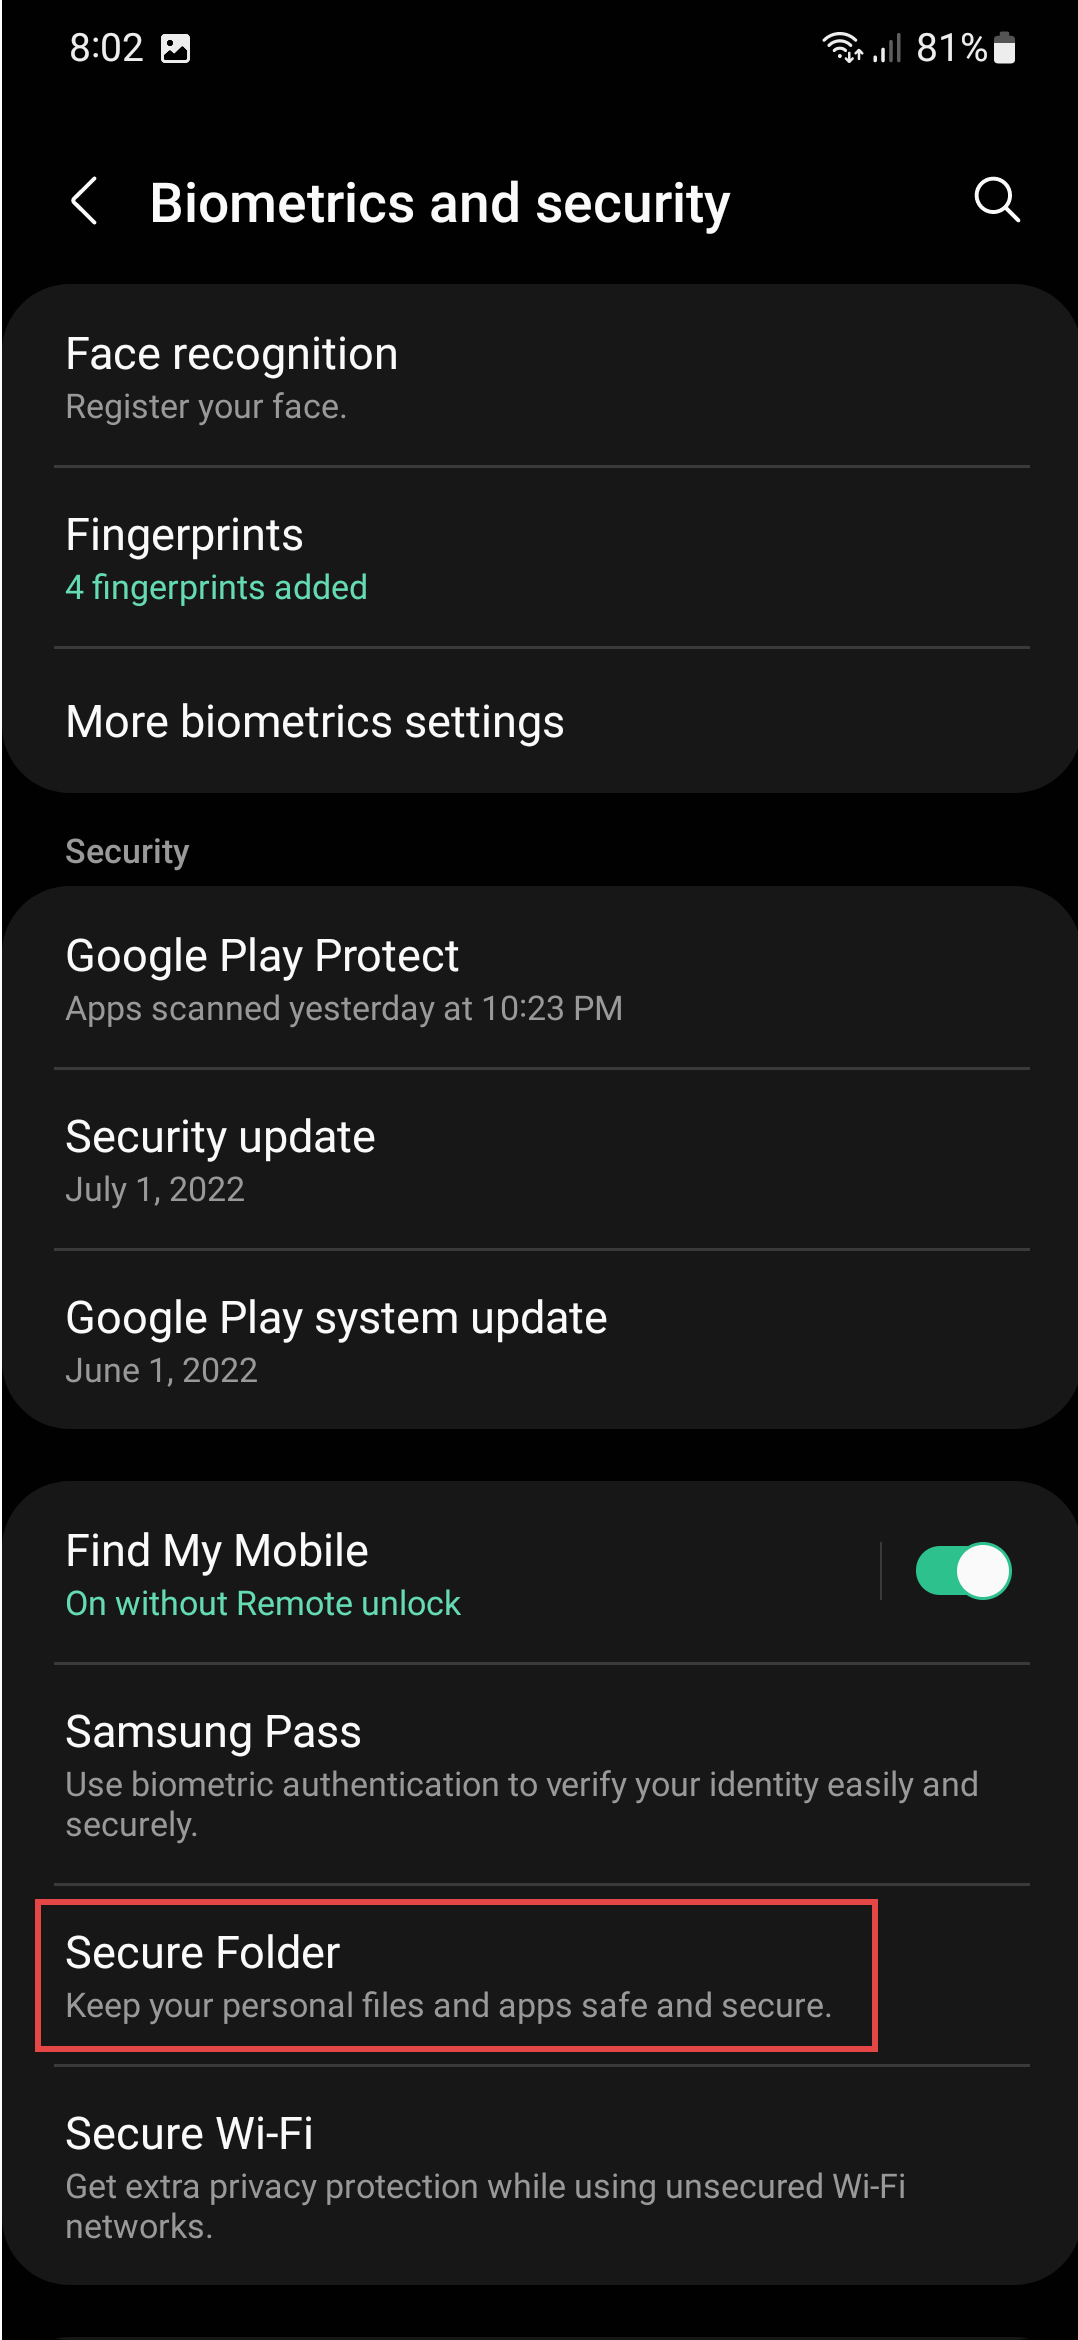 Navigate to the “Secure folder” in the “Biometrics and security” settings on your device.